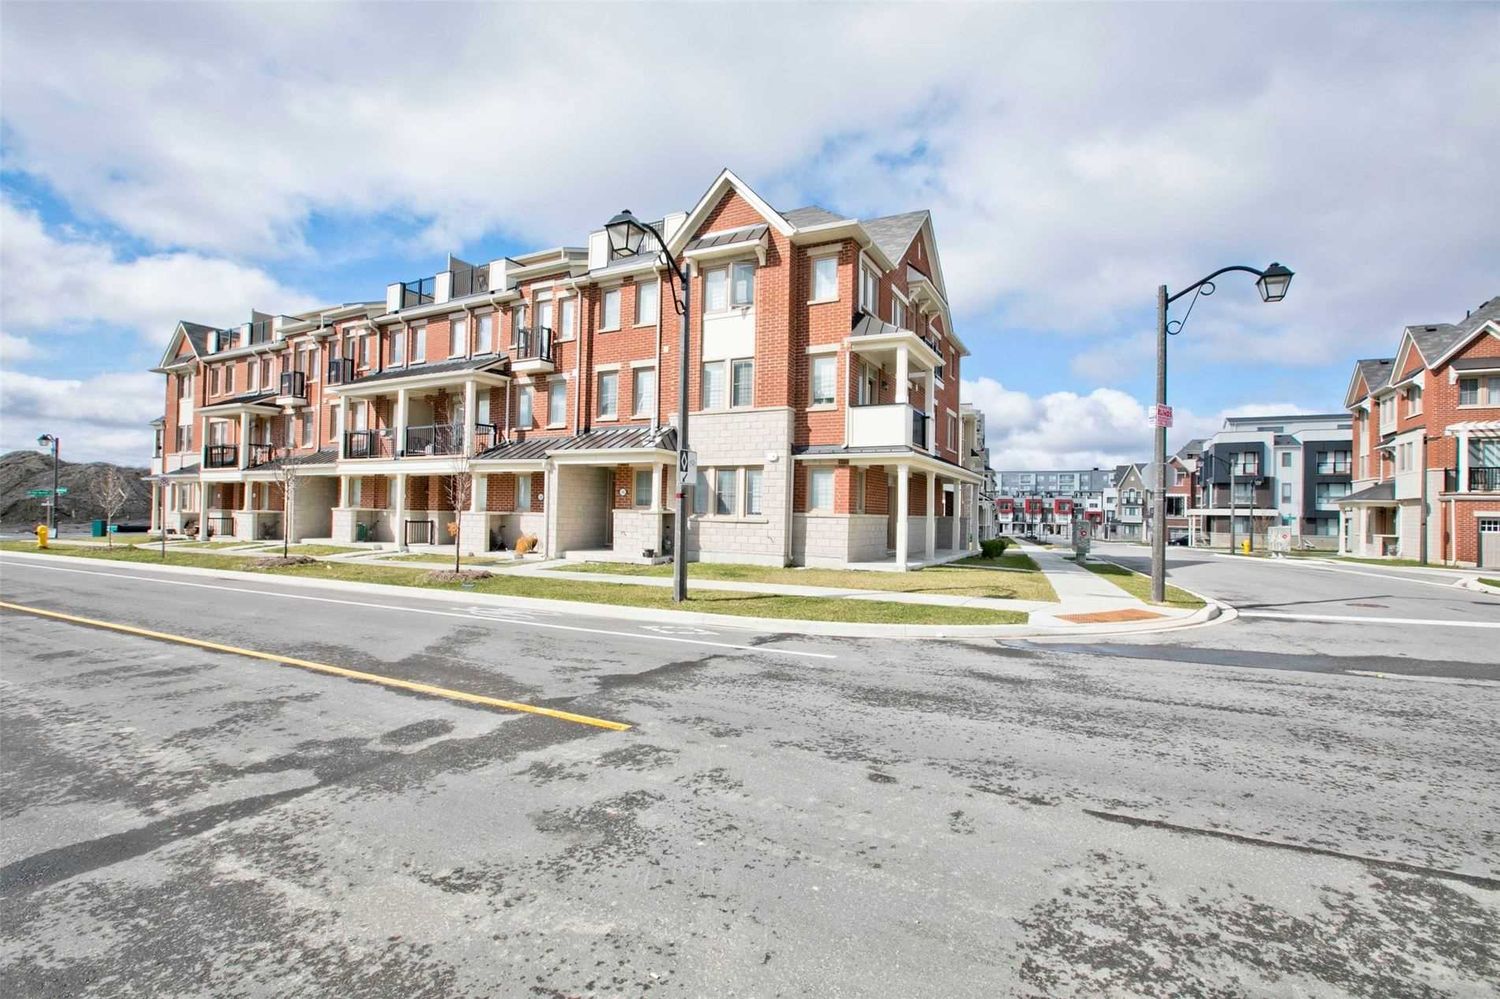 40-98 Cornell Centre Boulevard. Cornell Markham Townhomes is located in  Markham, Toronto - image #1 of 2